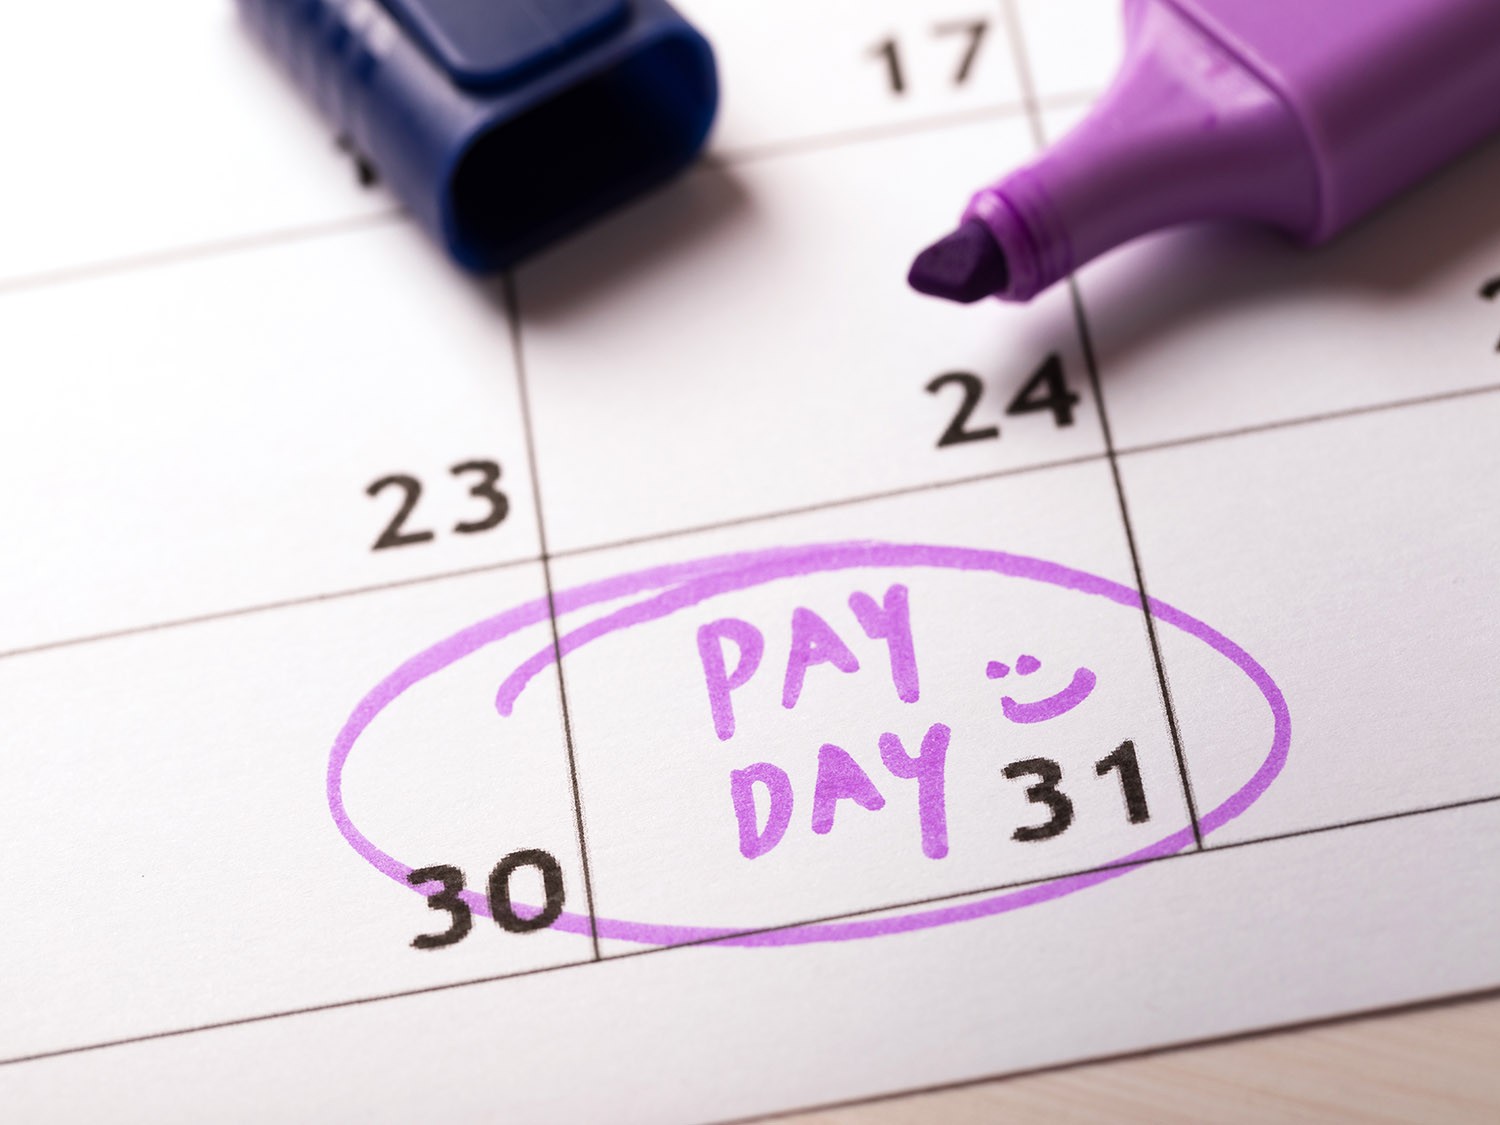 Calendar with last day of the month circled in highlighter marked "Payday" 